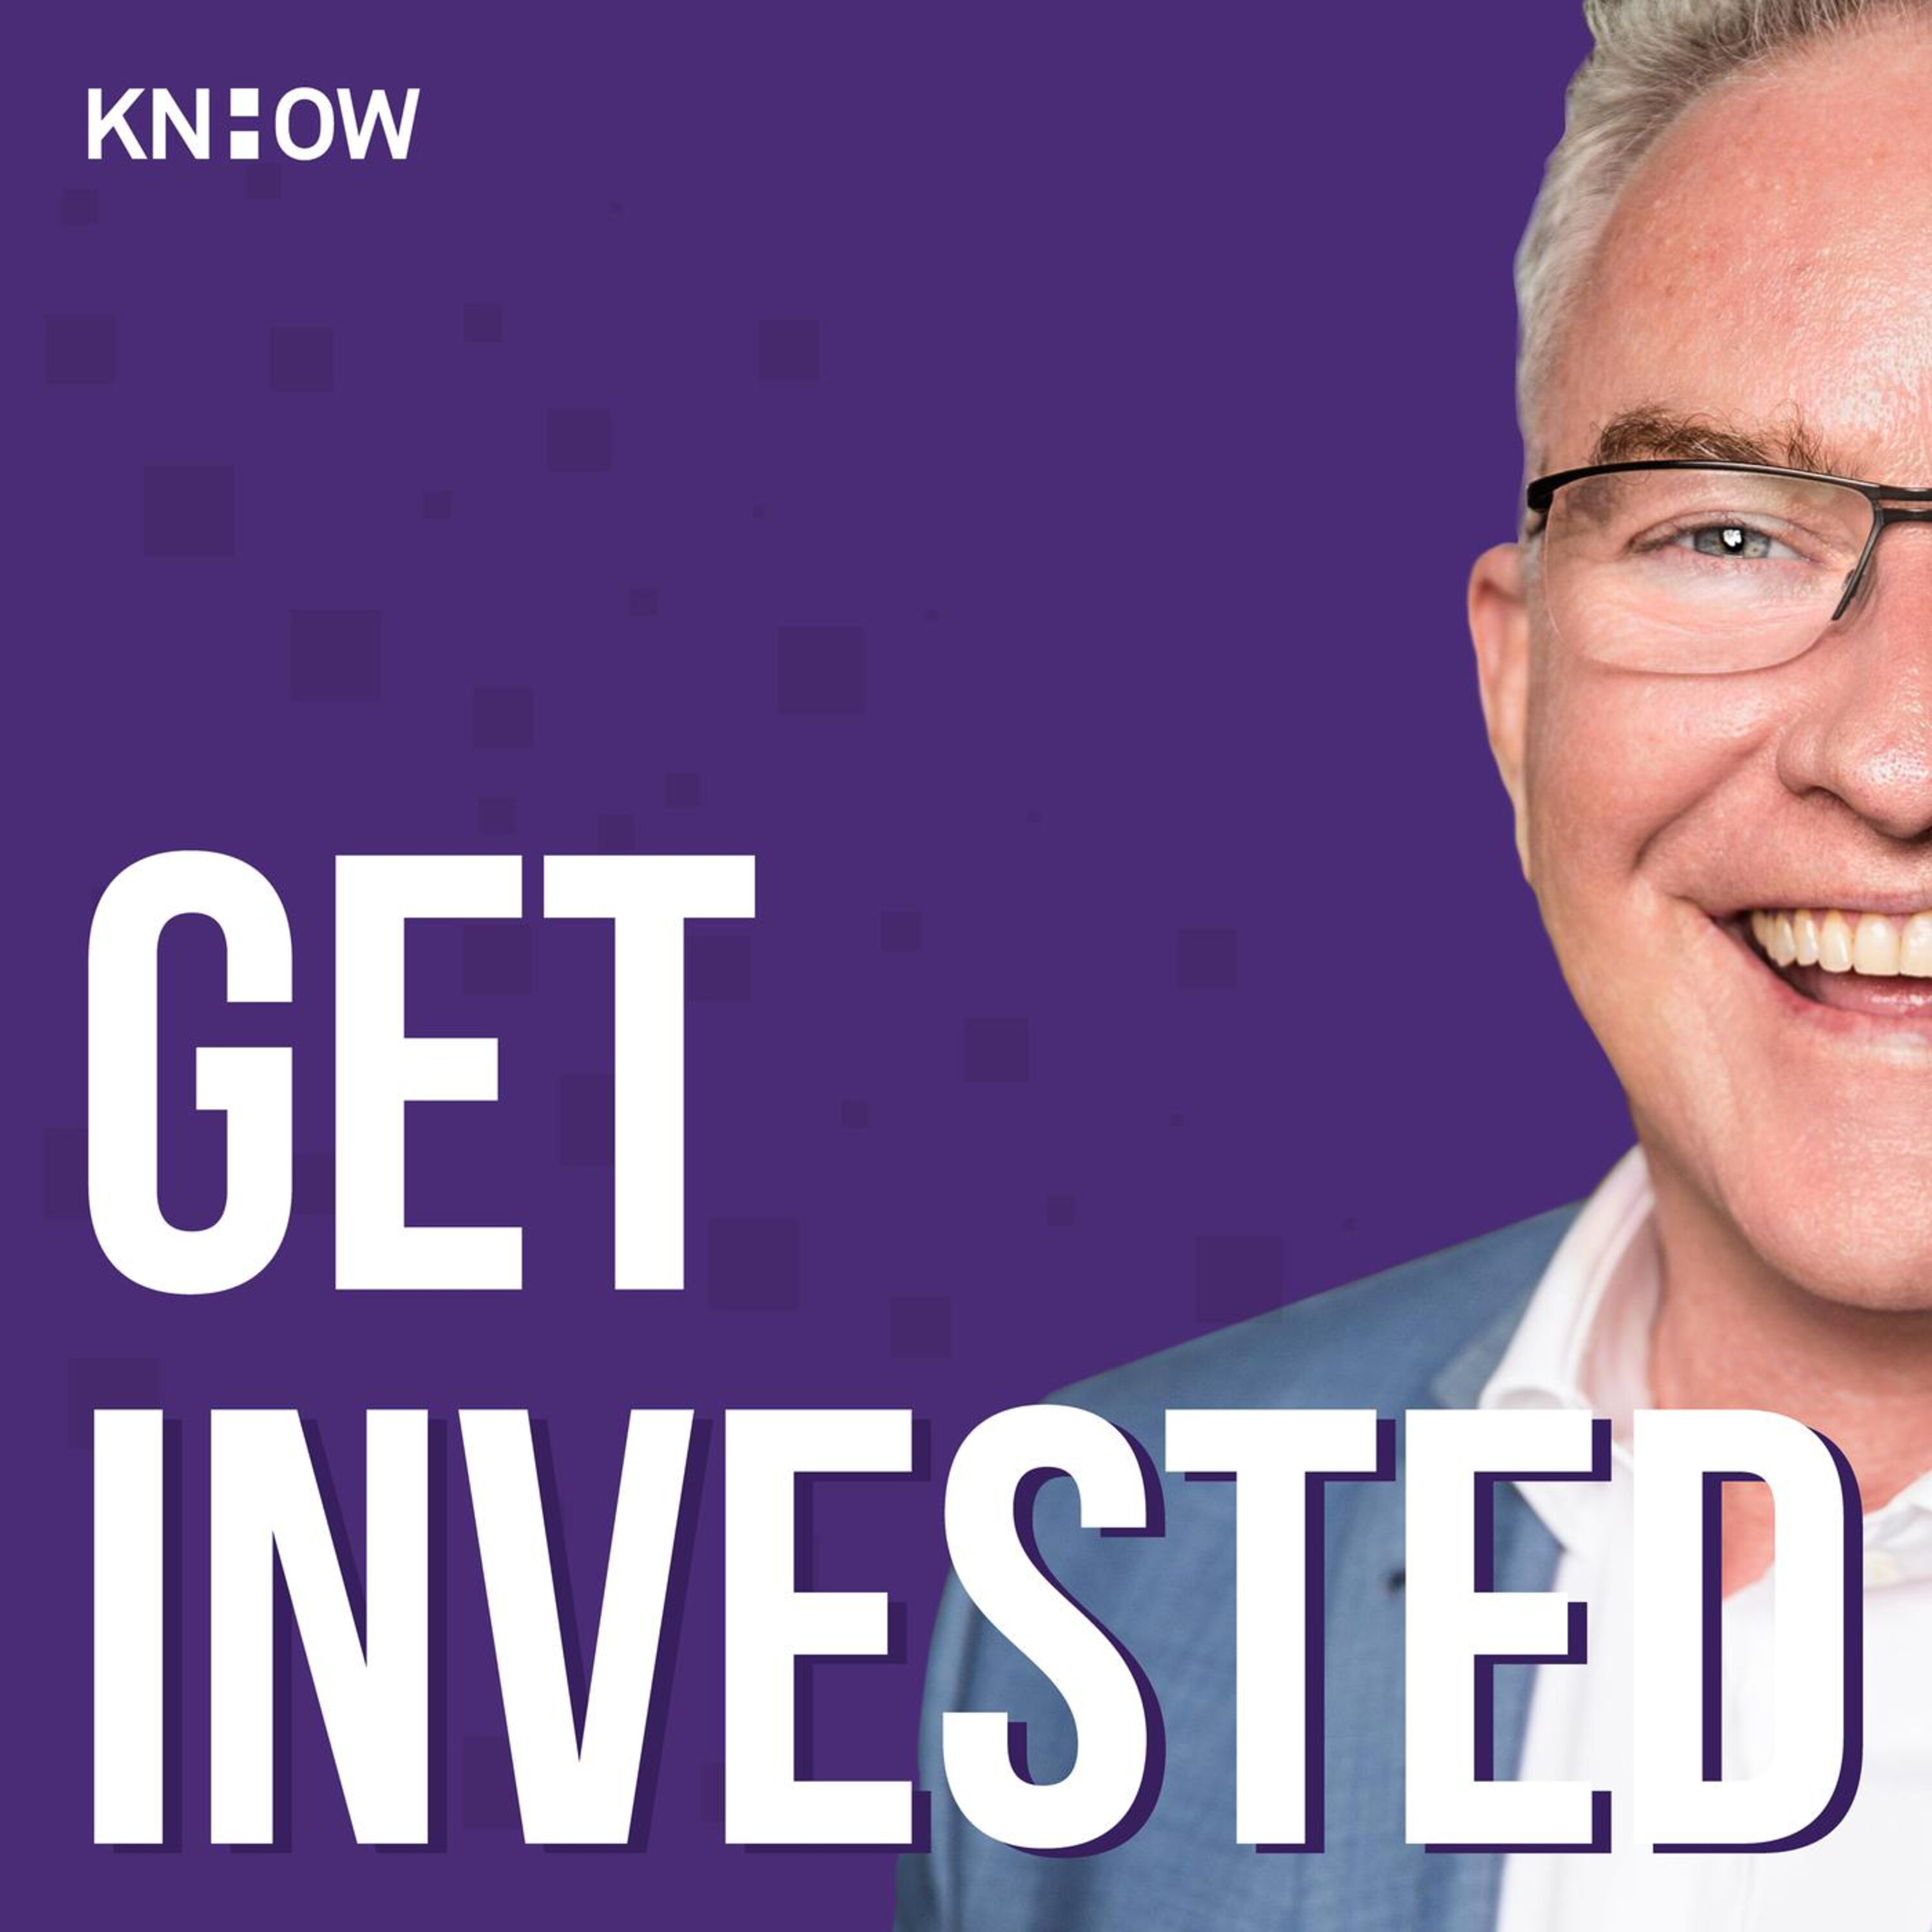 Get Invested: Joe Tucker on getting invested in Property Principles